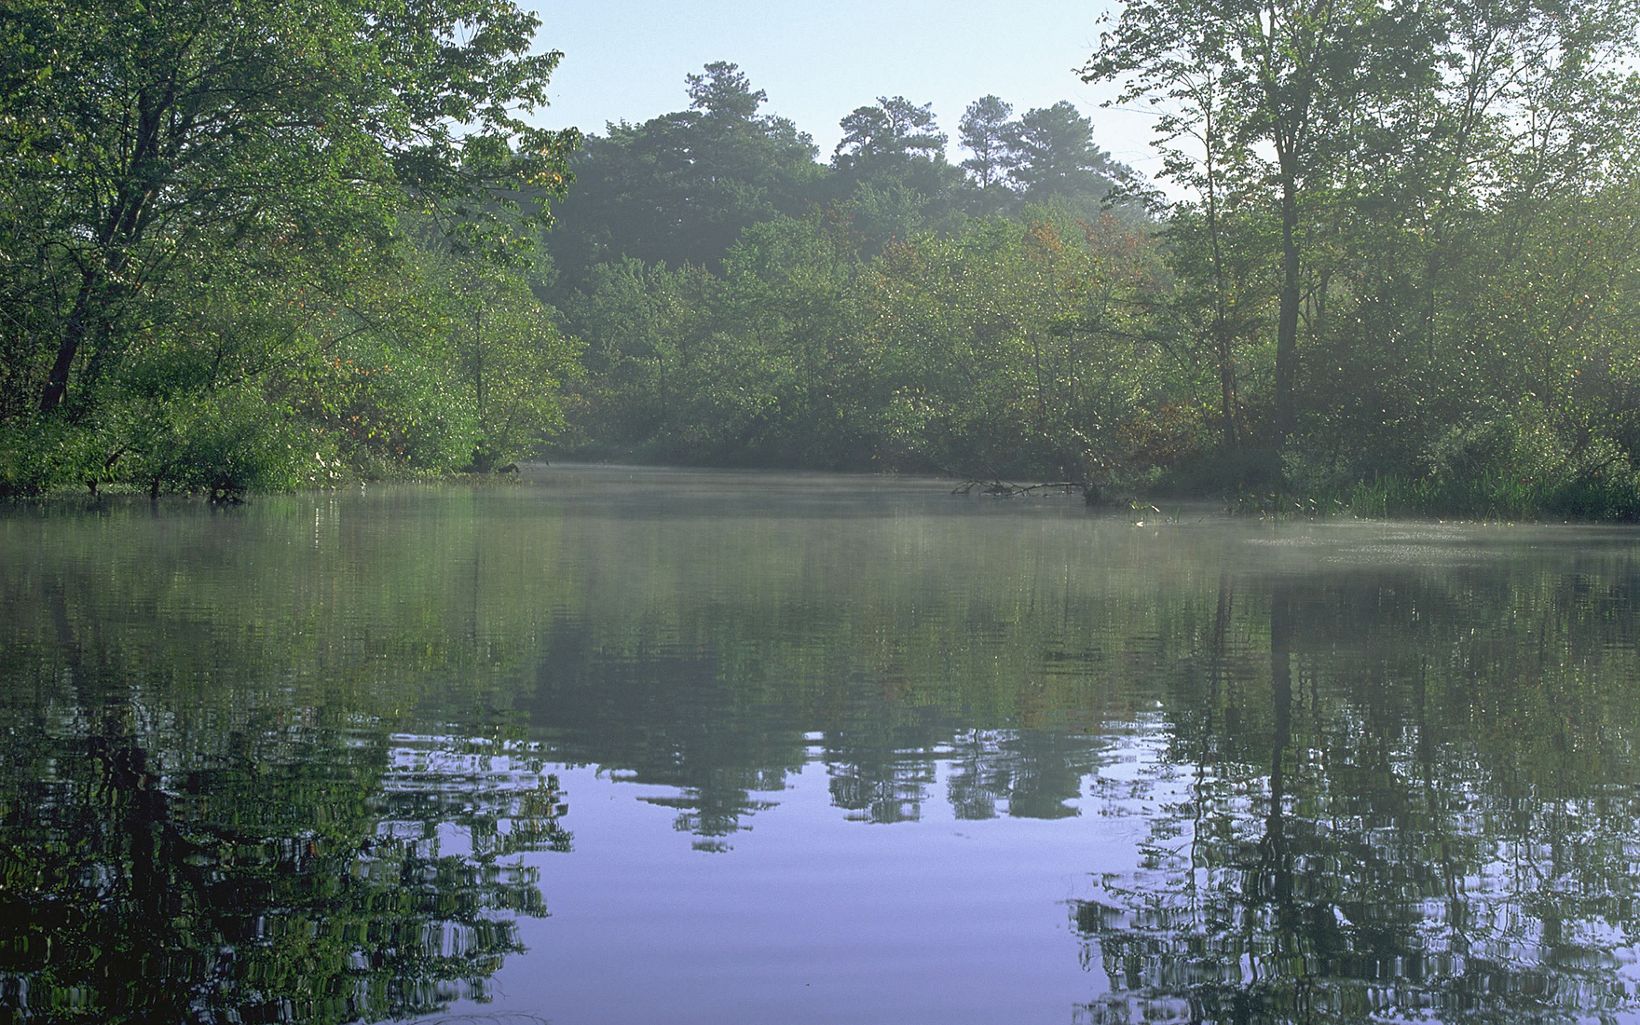 Light mist rises from the still water of the Nanticoke River. The tall trees that line the riverbank are reflected in the water.